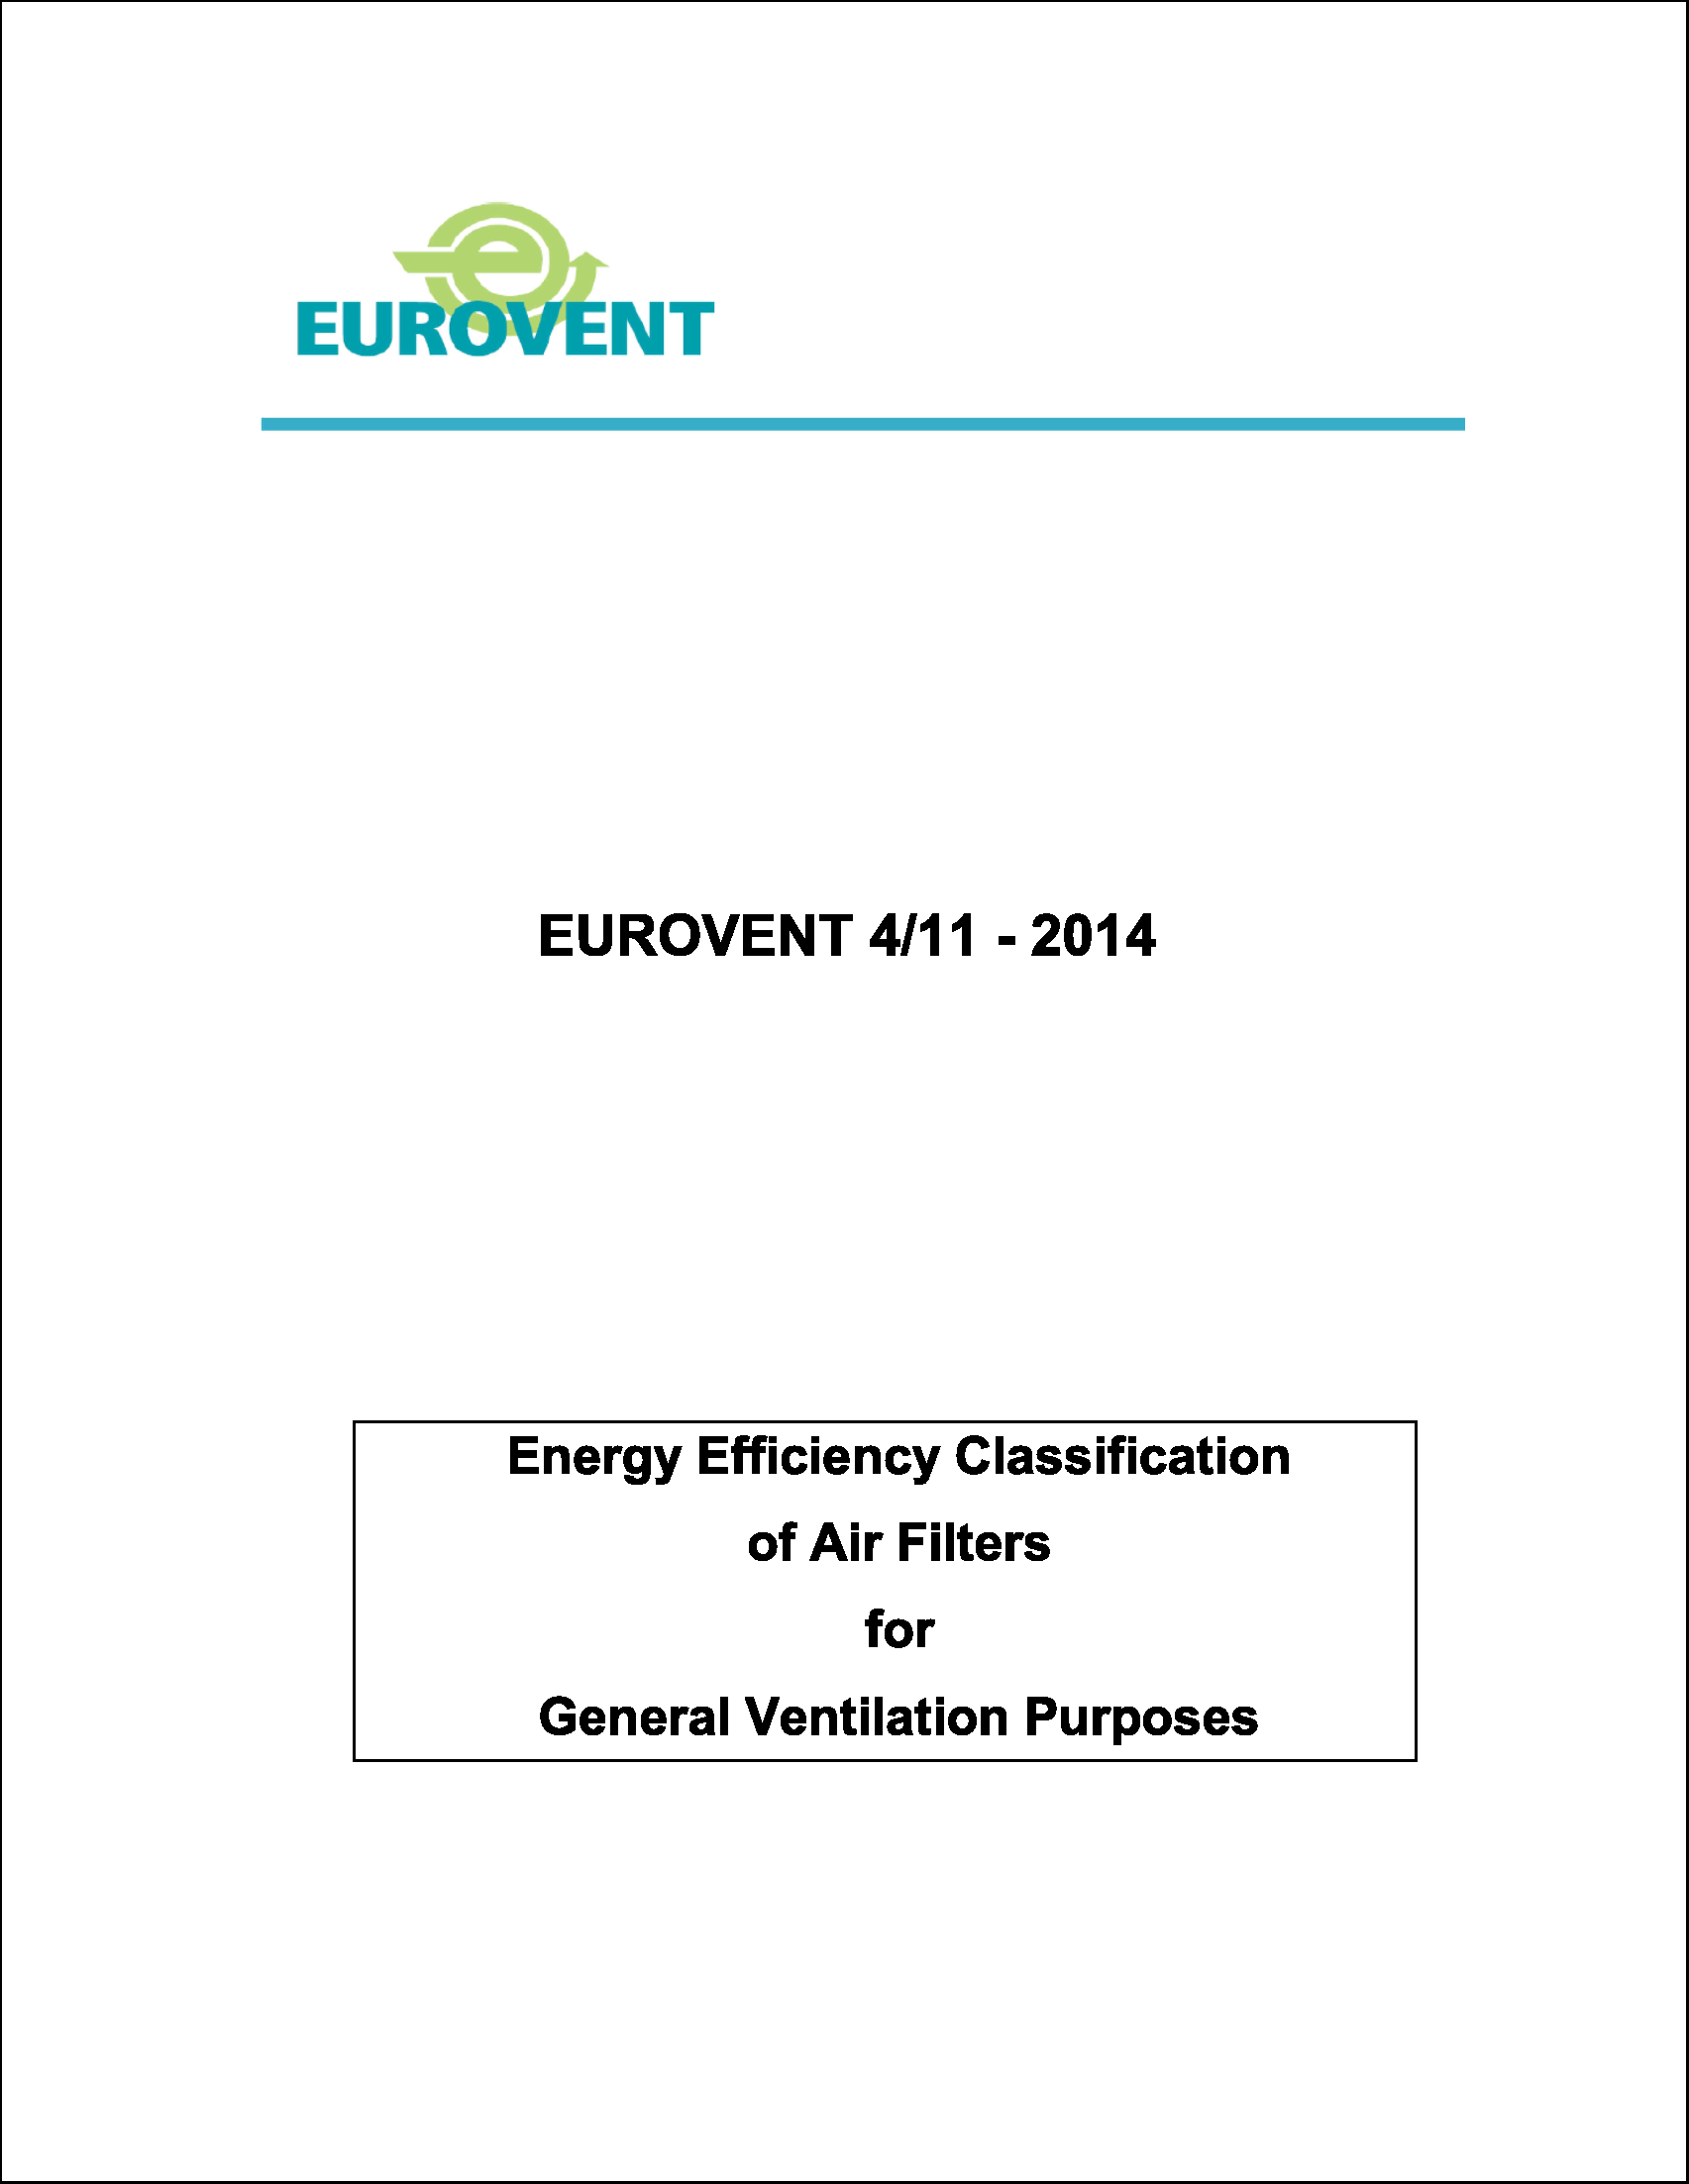 2014 - Method of testing air filters used in general ventilation and recommended classification